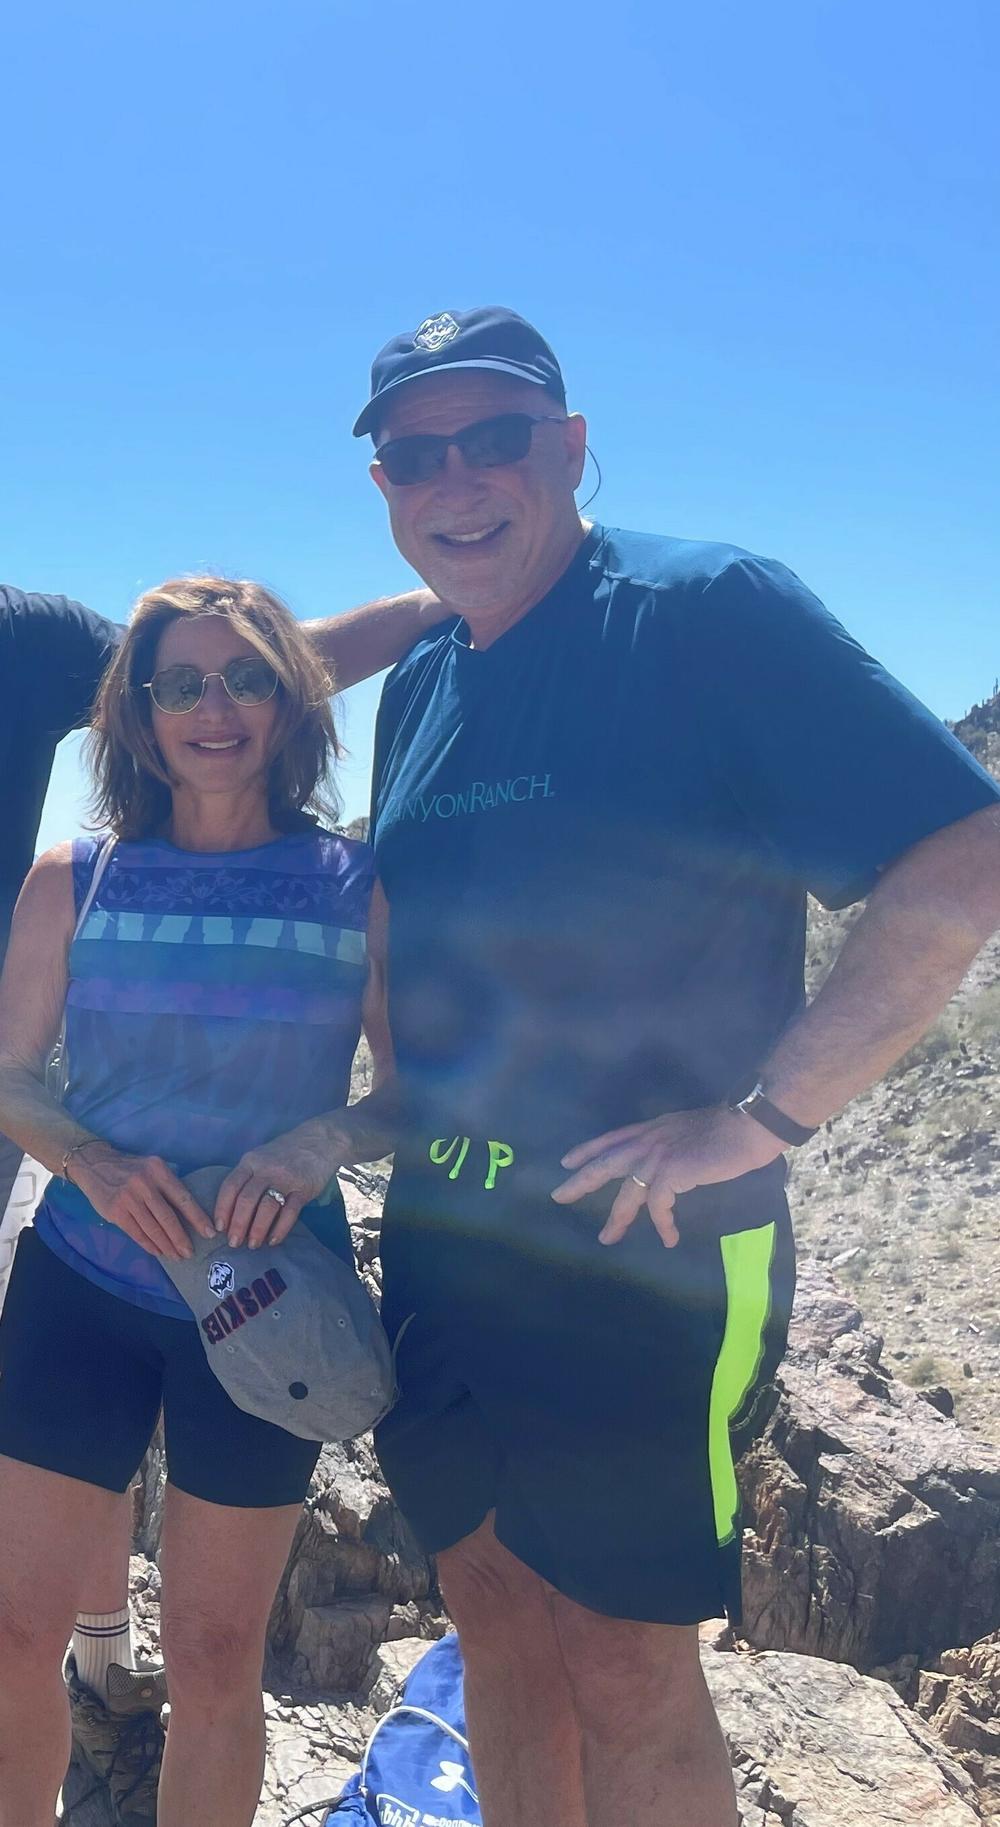 Shari and Michael Cantor both take metformin. They are both in their mid-60s and say they feel healthy and full of energy.